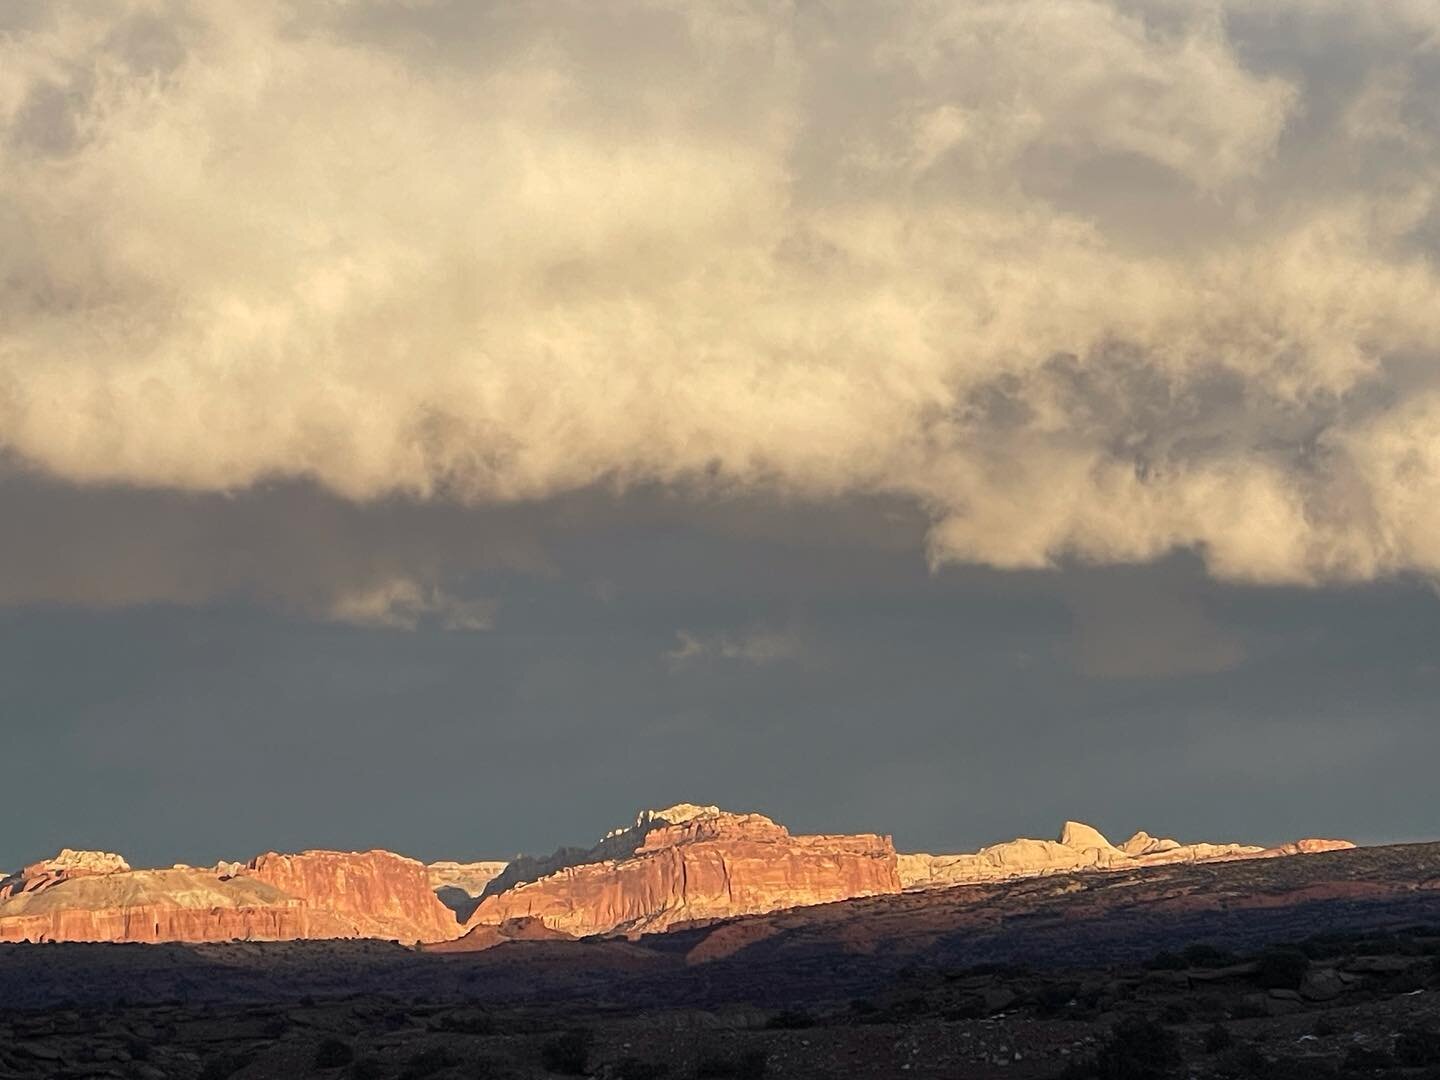 Mighty nice place to gather with your family for Thanksgiving! I hope your holiday was just as lovely. #capitolreefnationalpark #stormclouds